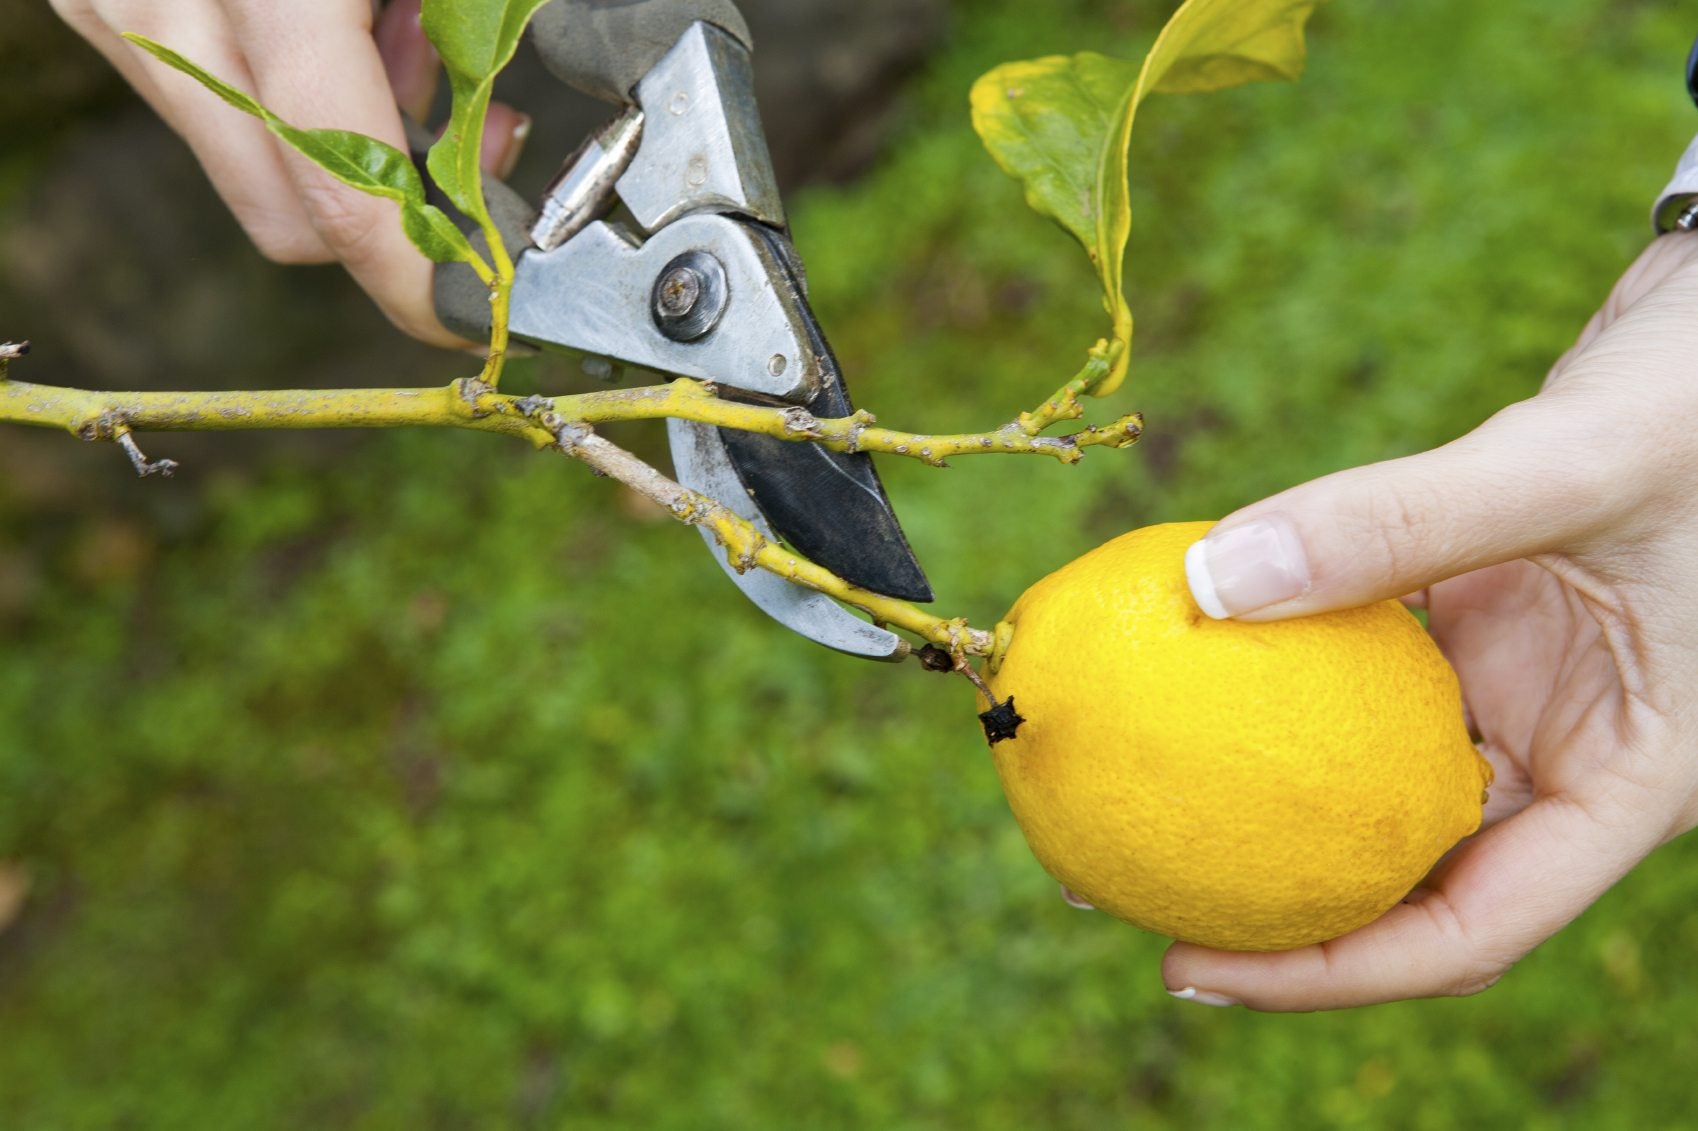 When to prune a lemon tree – get your timing right to keep trees looking neat and producing fruit